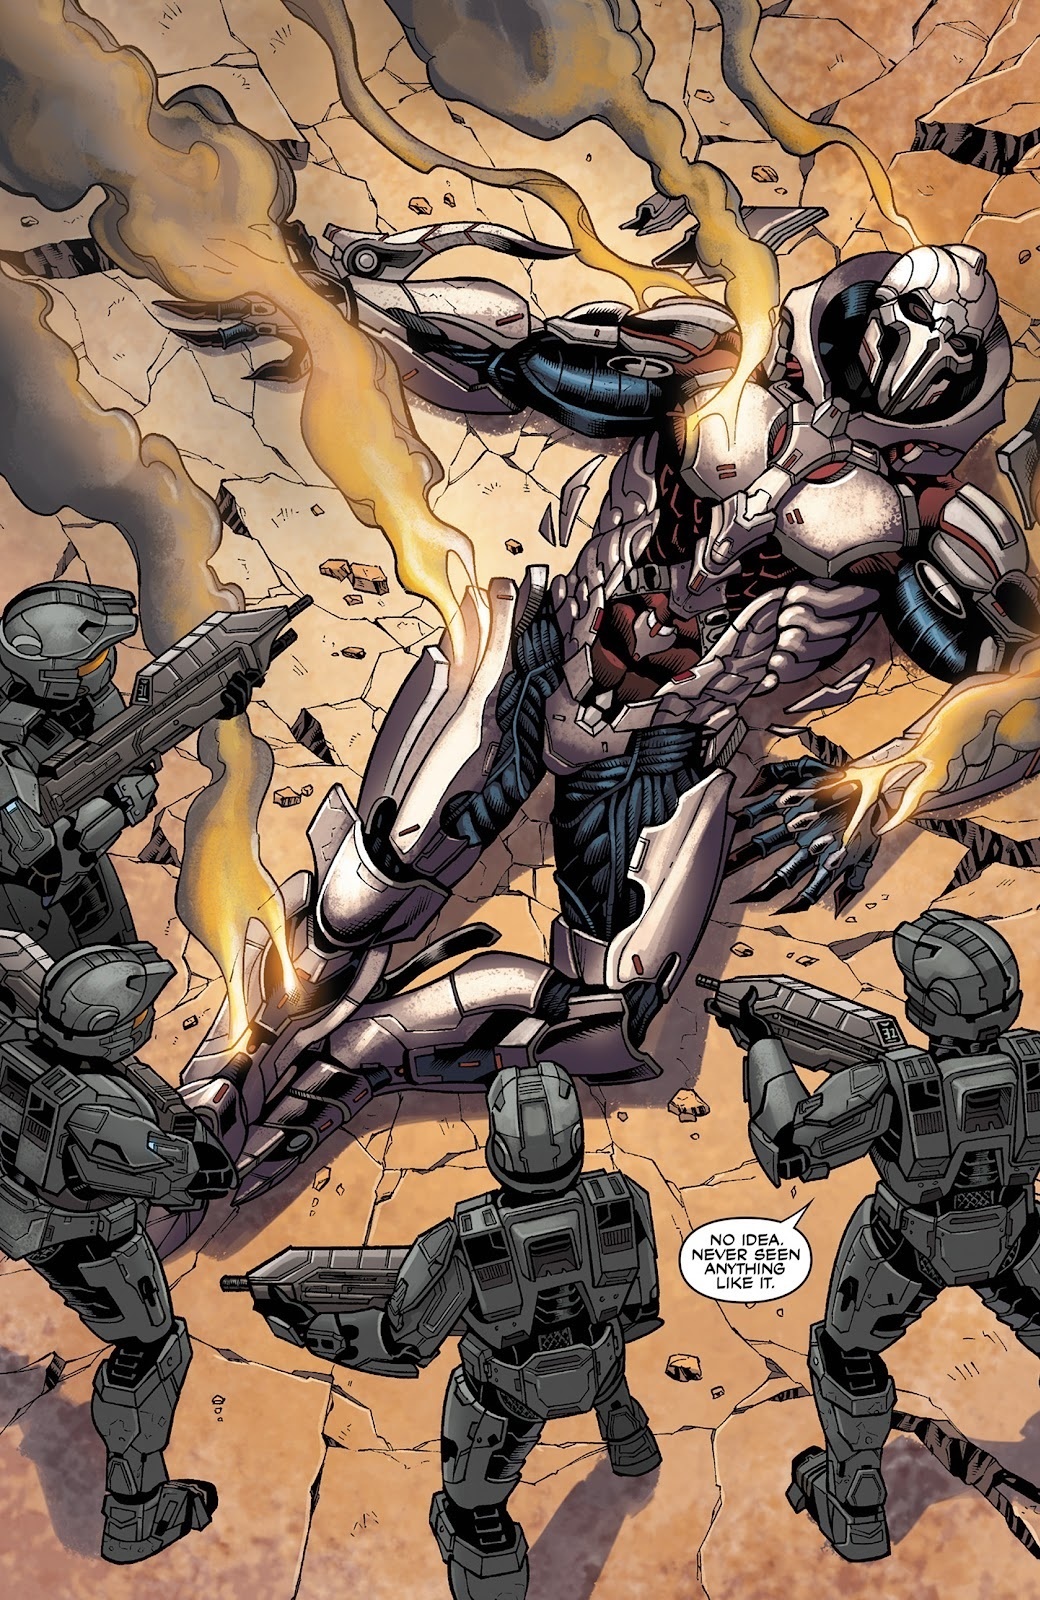 Halo: Escalation comic panel of Black Team finding the Didact unconscious on Gamma Halo